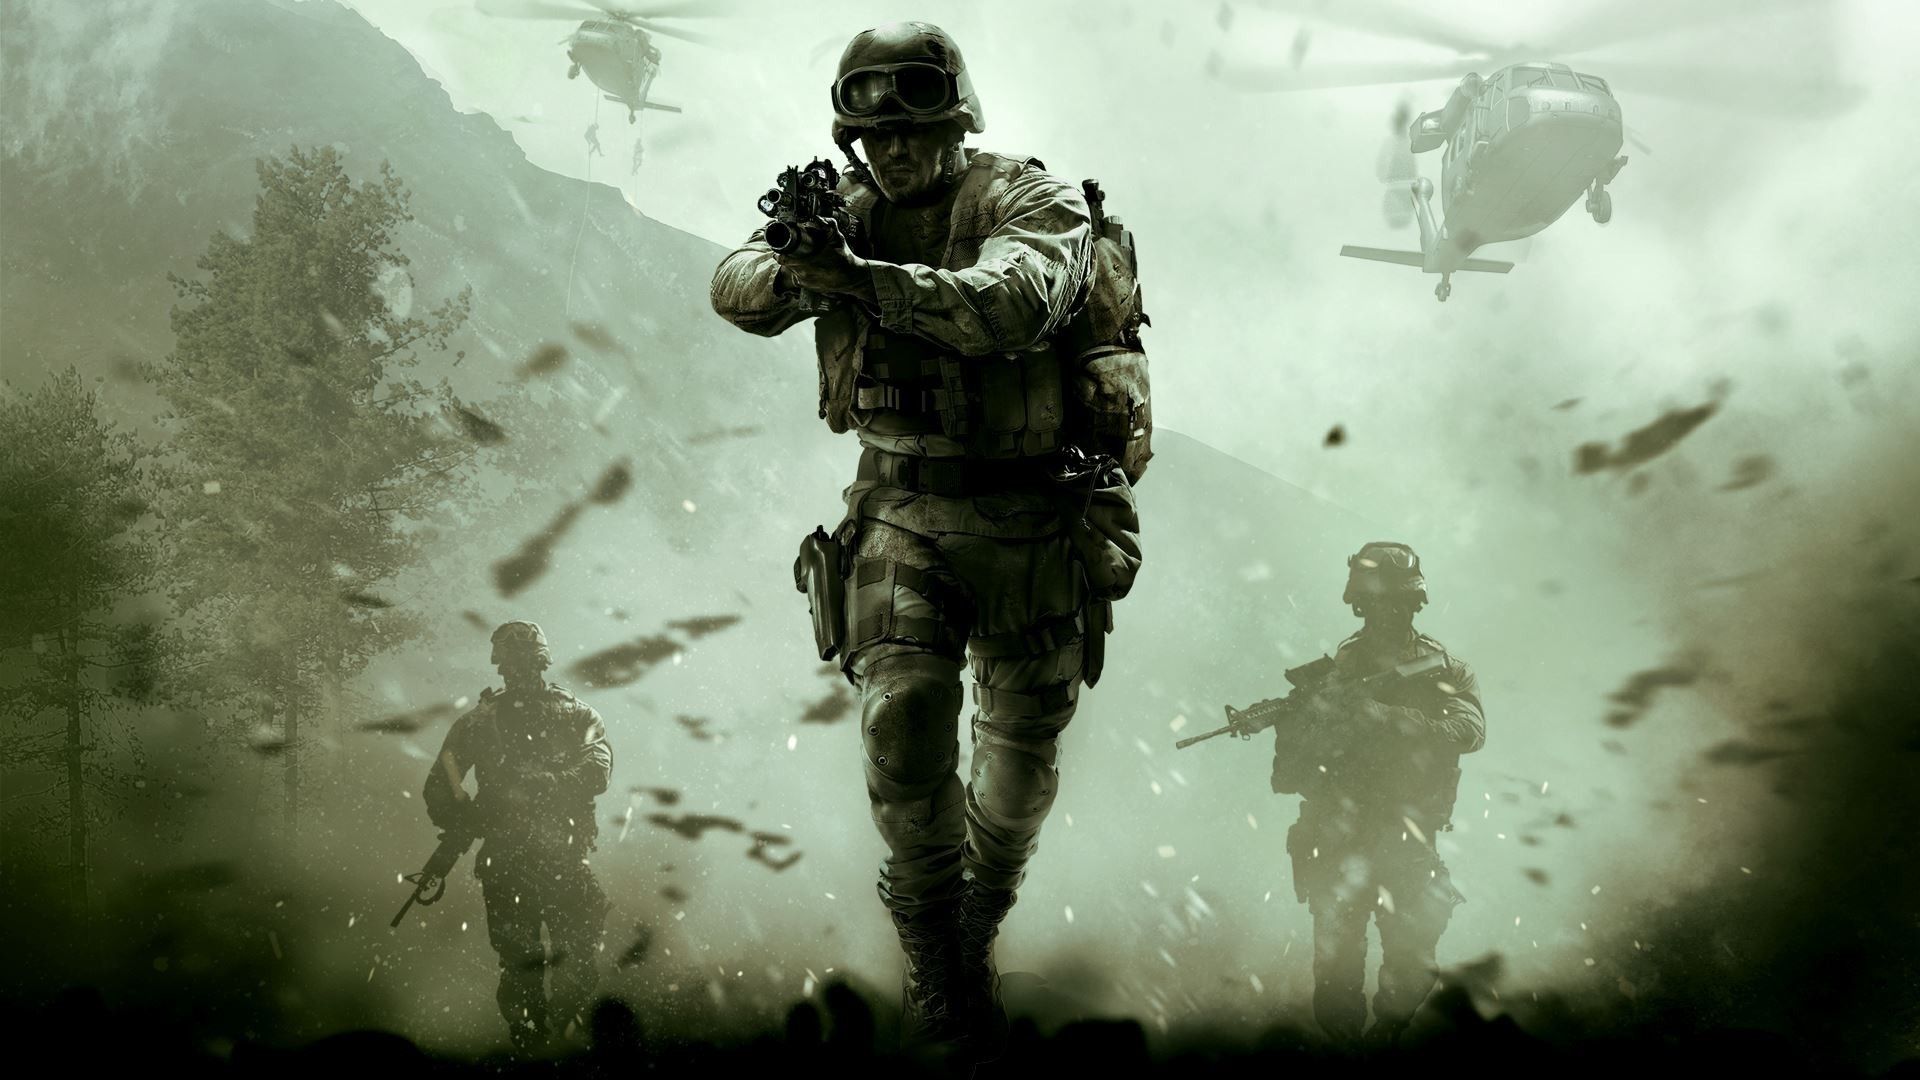 Call of duty 1080P, 2K, 4K, 5K HD wallpapers free download